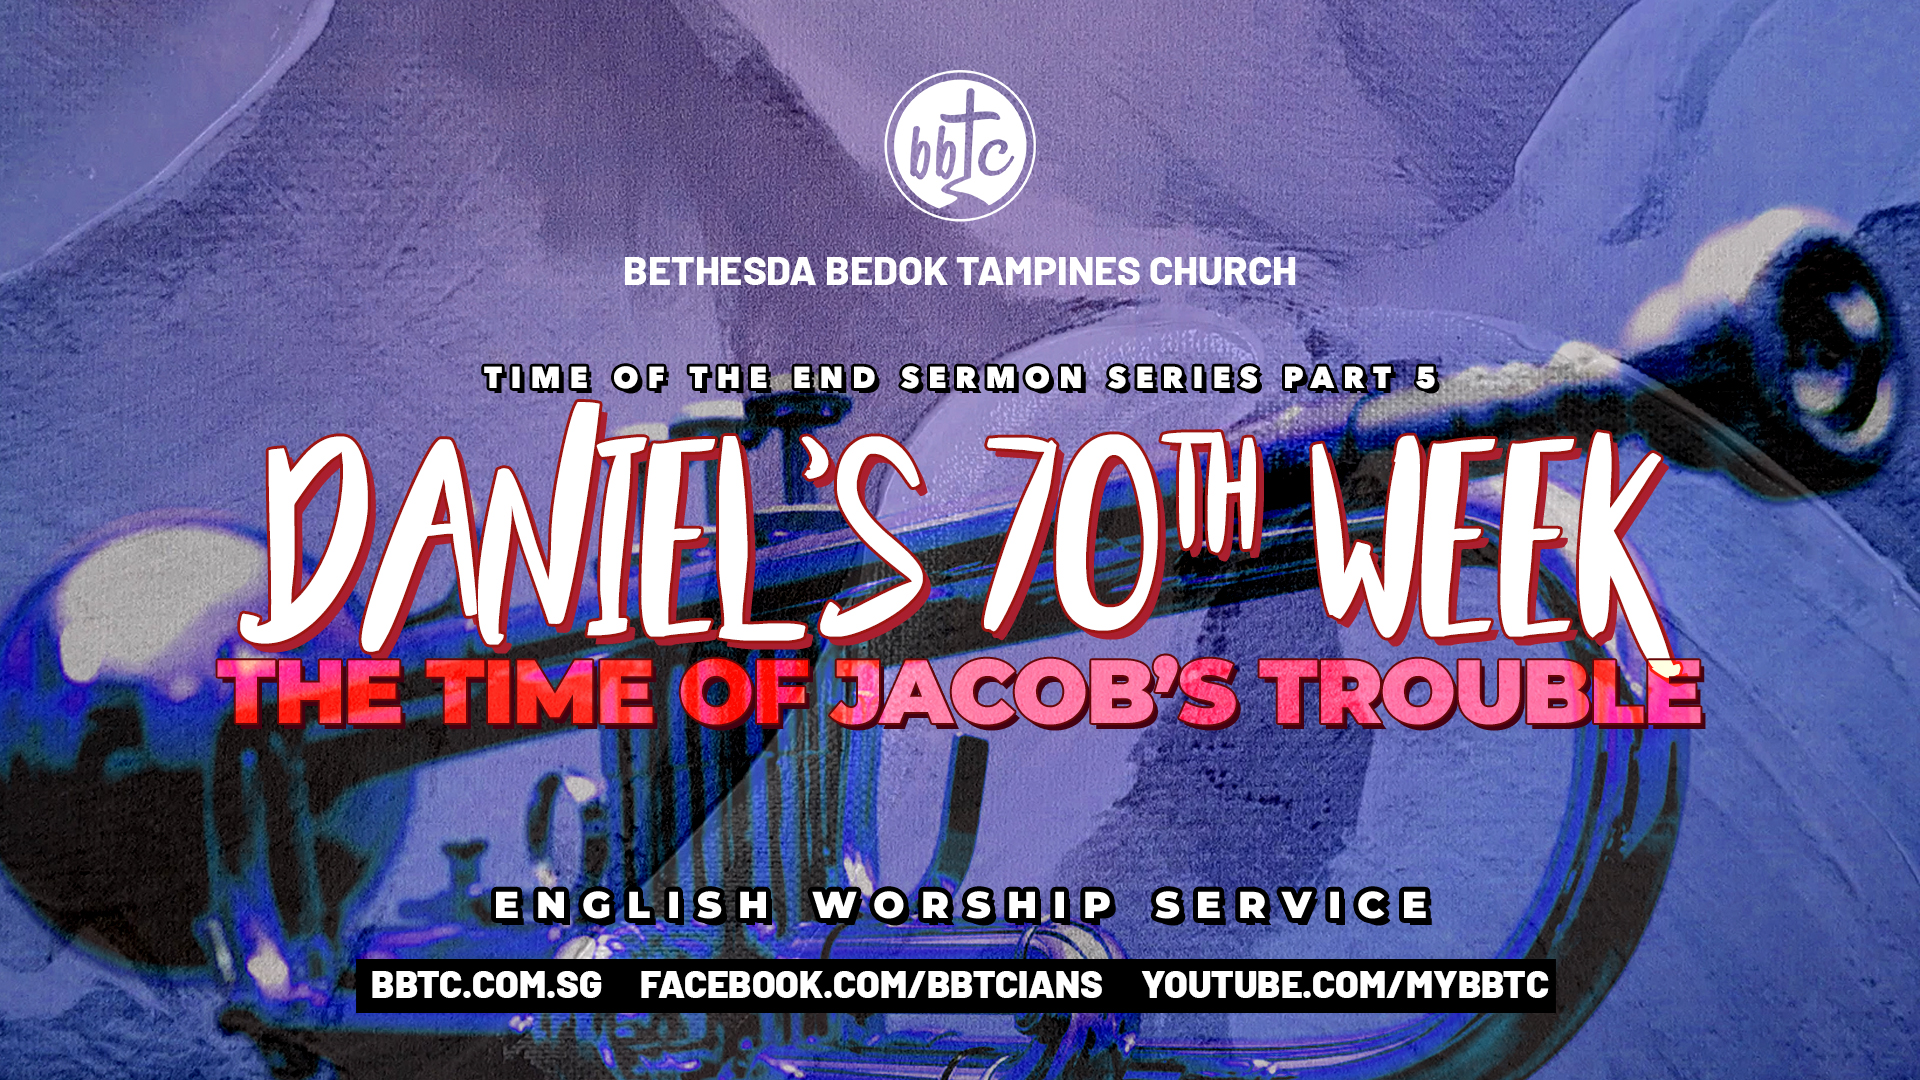 DANIEL’S 70TH WEEK – THE TIME OF JACOB’S TROUBLE